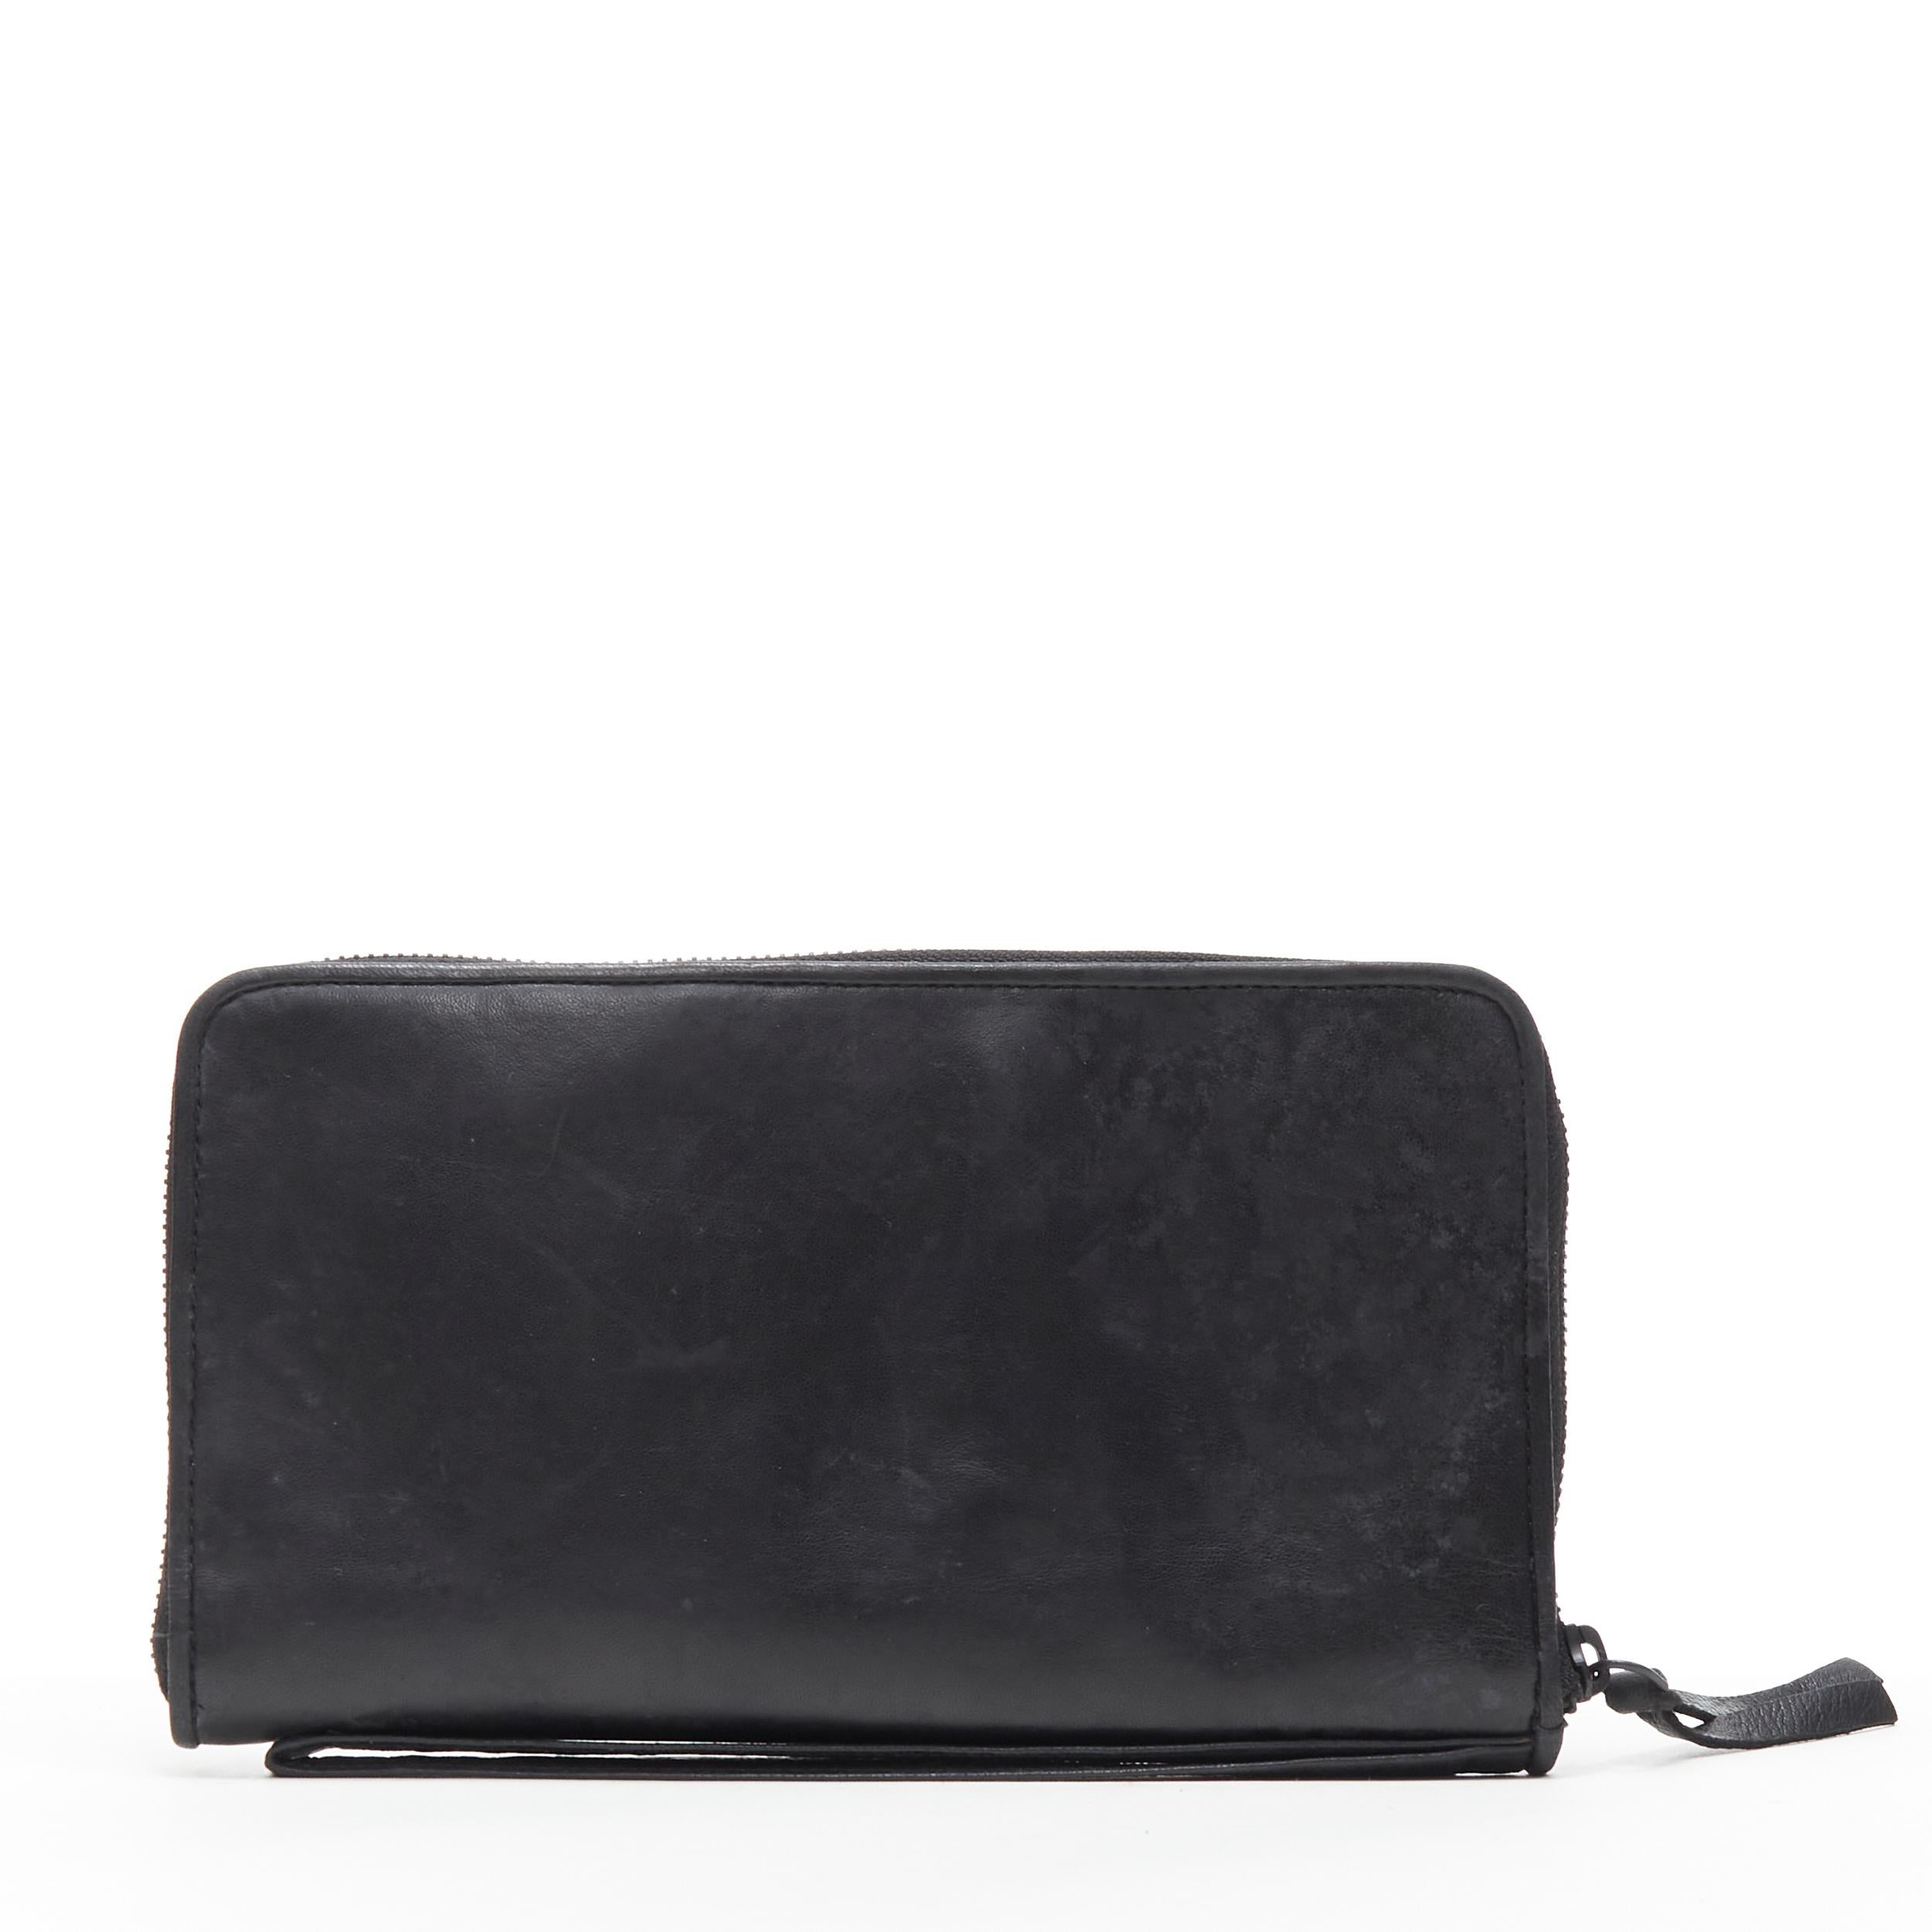 NATALIA BRILLI surrealist card coins shadow deboss black zip clutch bag 
Reference: CAWG/A00166 
Brand: Natalia Brilli
Designer: Natalia Brilli 
Model: Surrealist zip clutch 
Material: Leather 
Color: Black
 Pattern: Solid 
Closure: Zip 
Extra